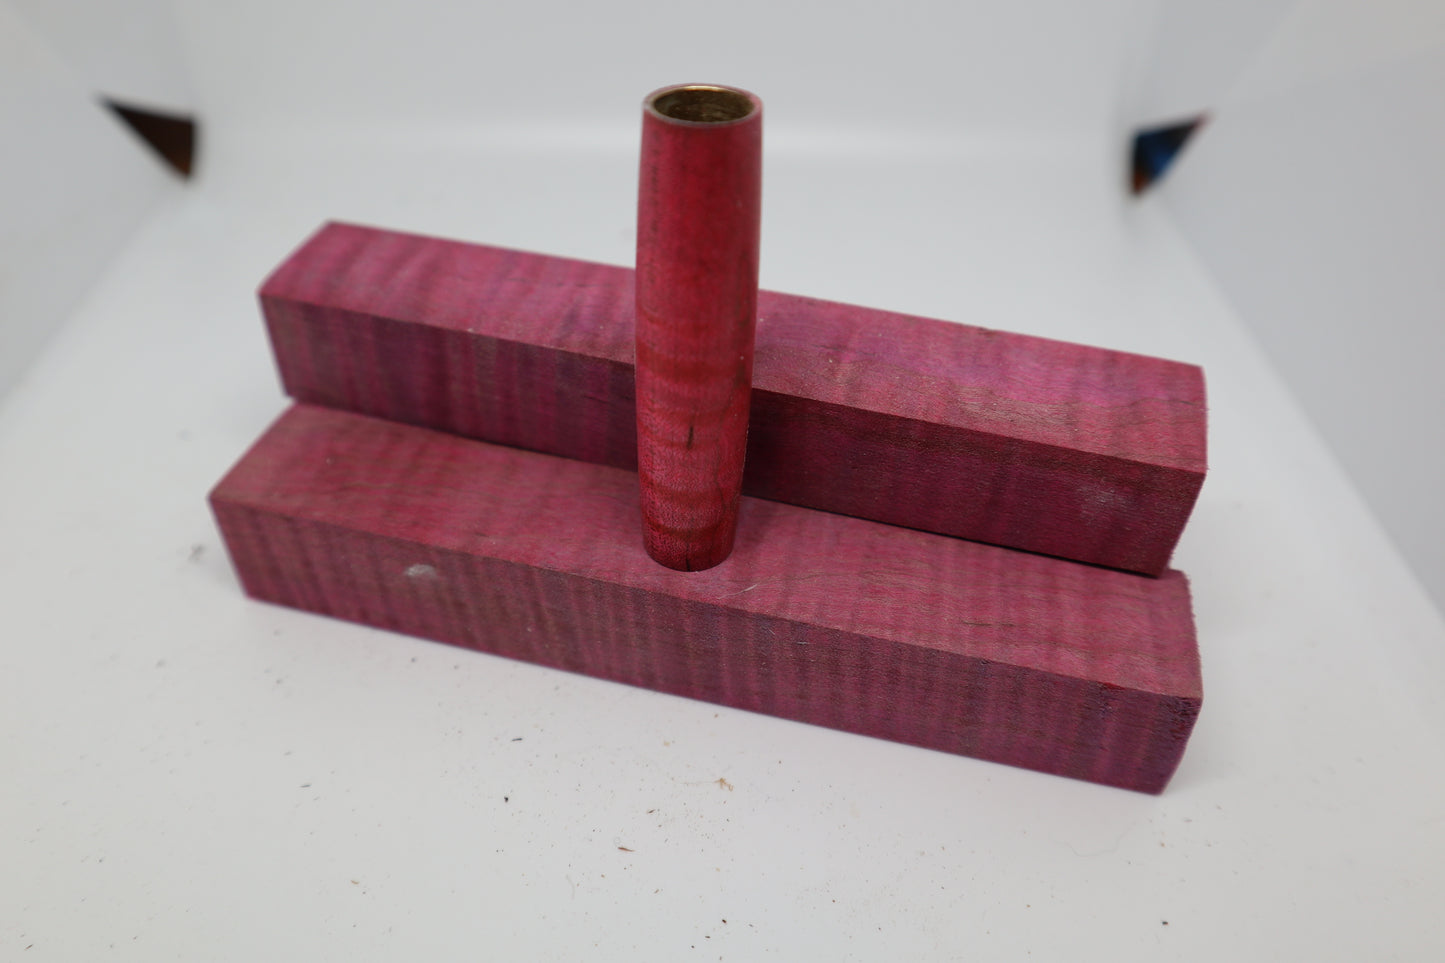 Pink dye stabilized curly maple